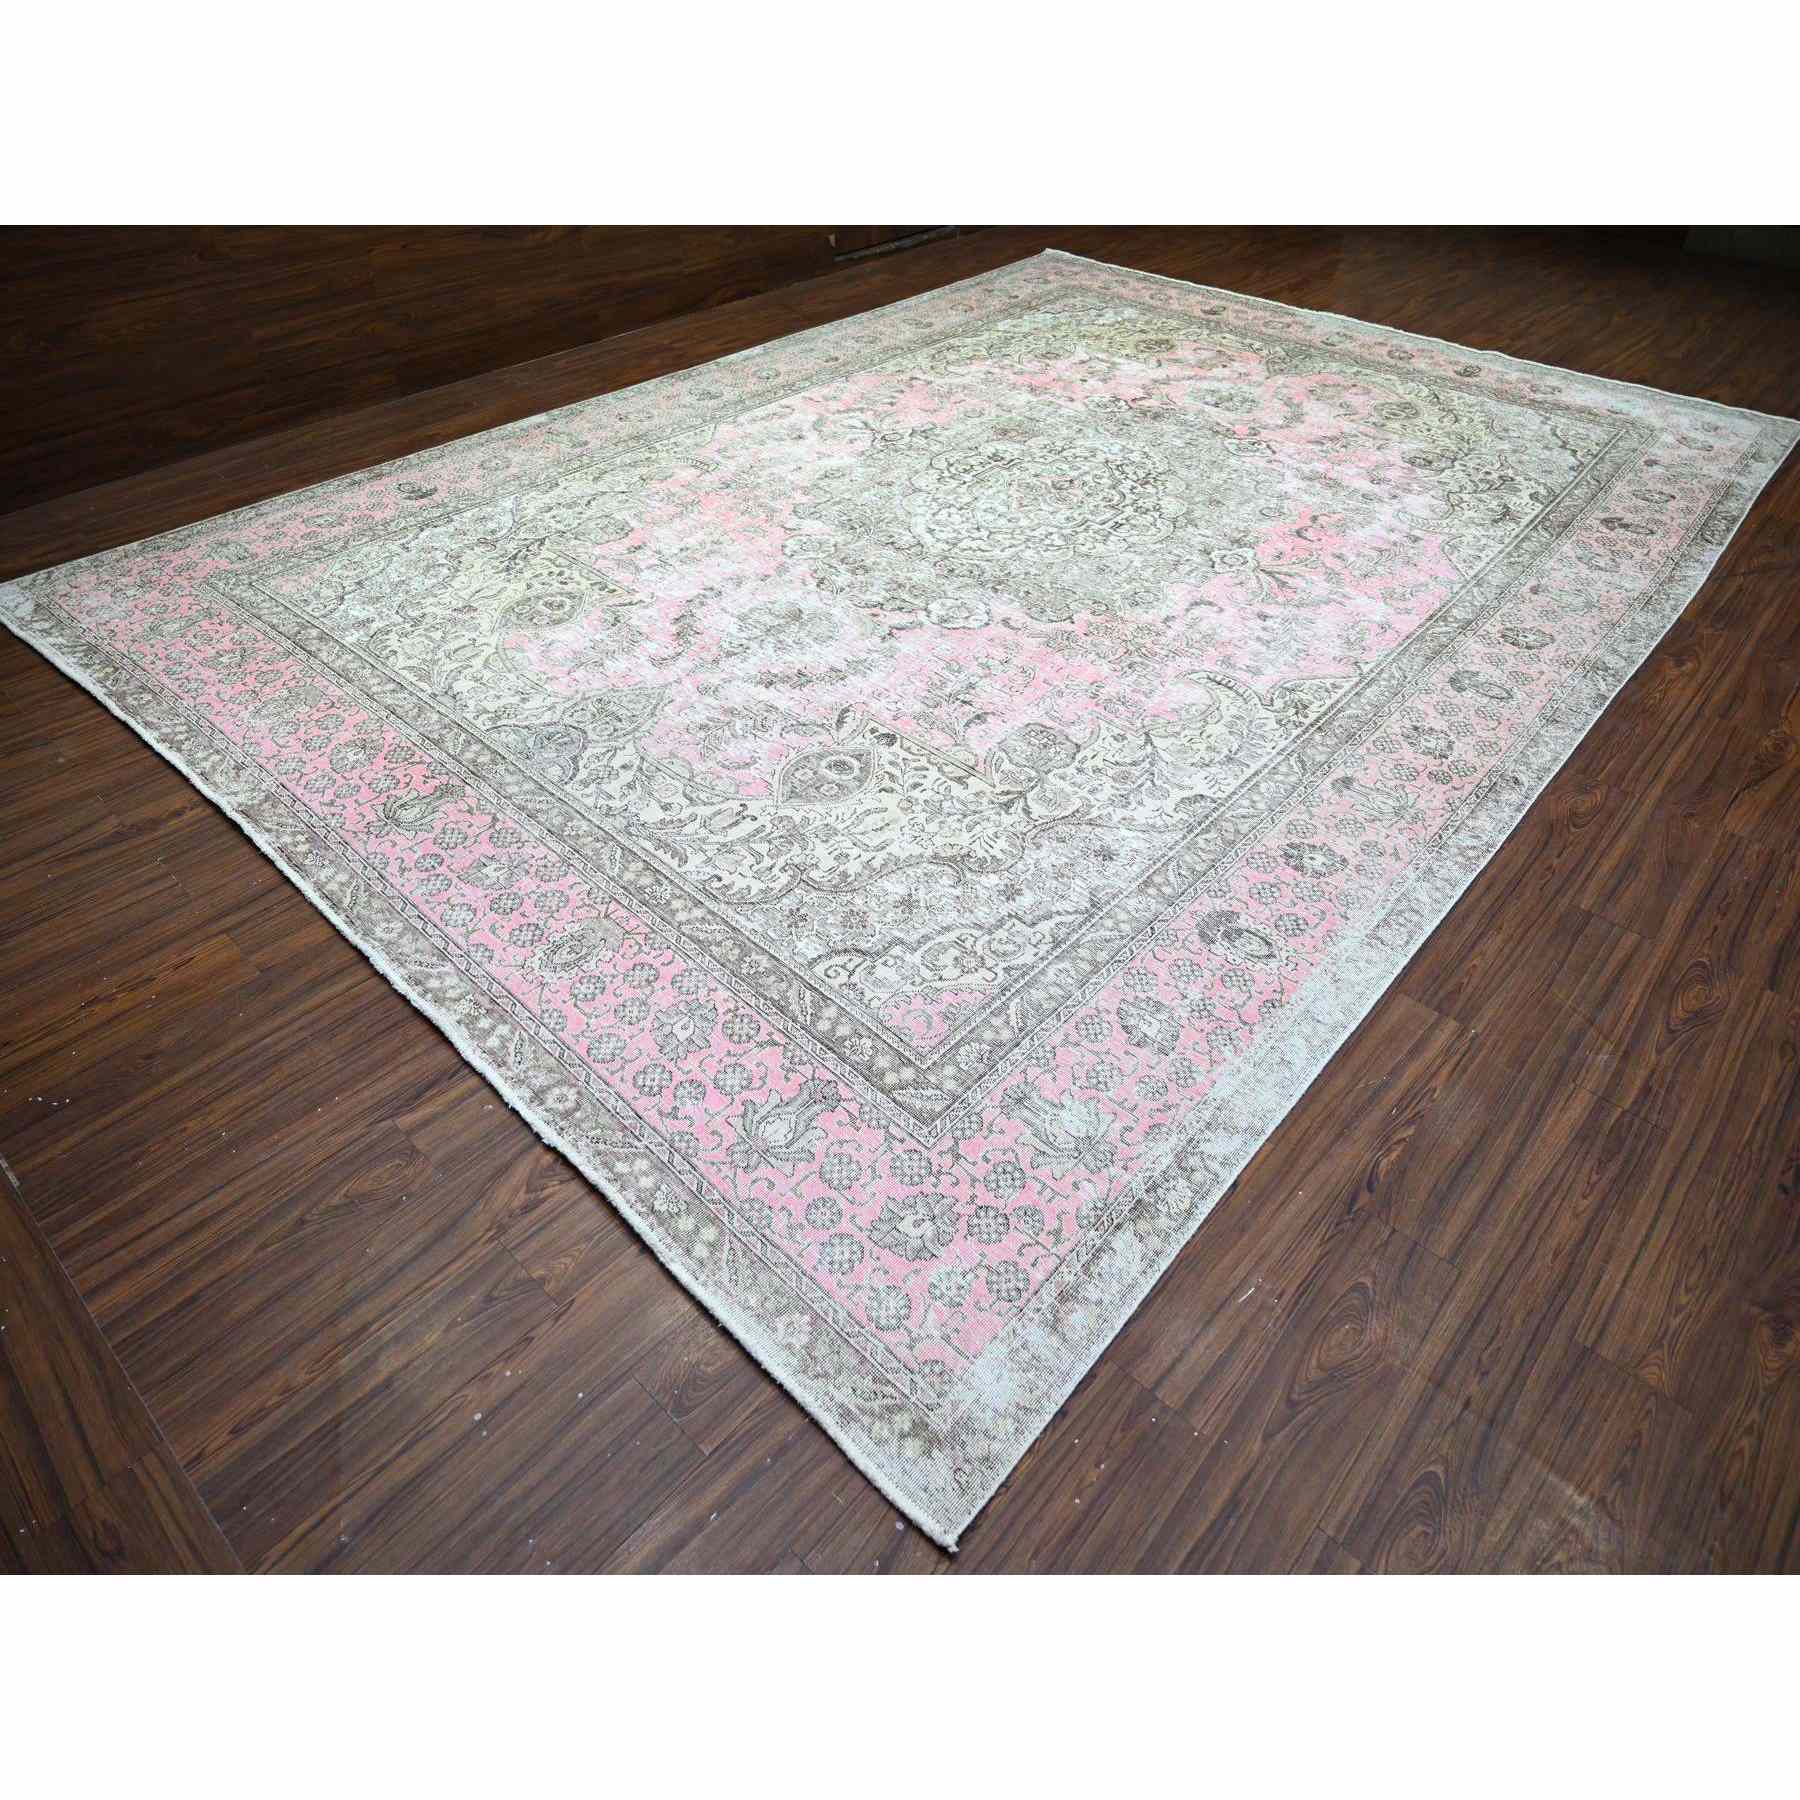 Overdyed-Vintage-Hand-Knotted-Rug-372405